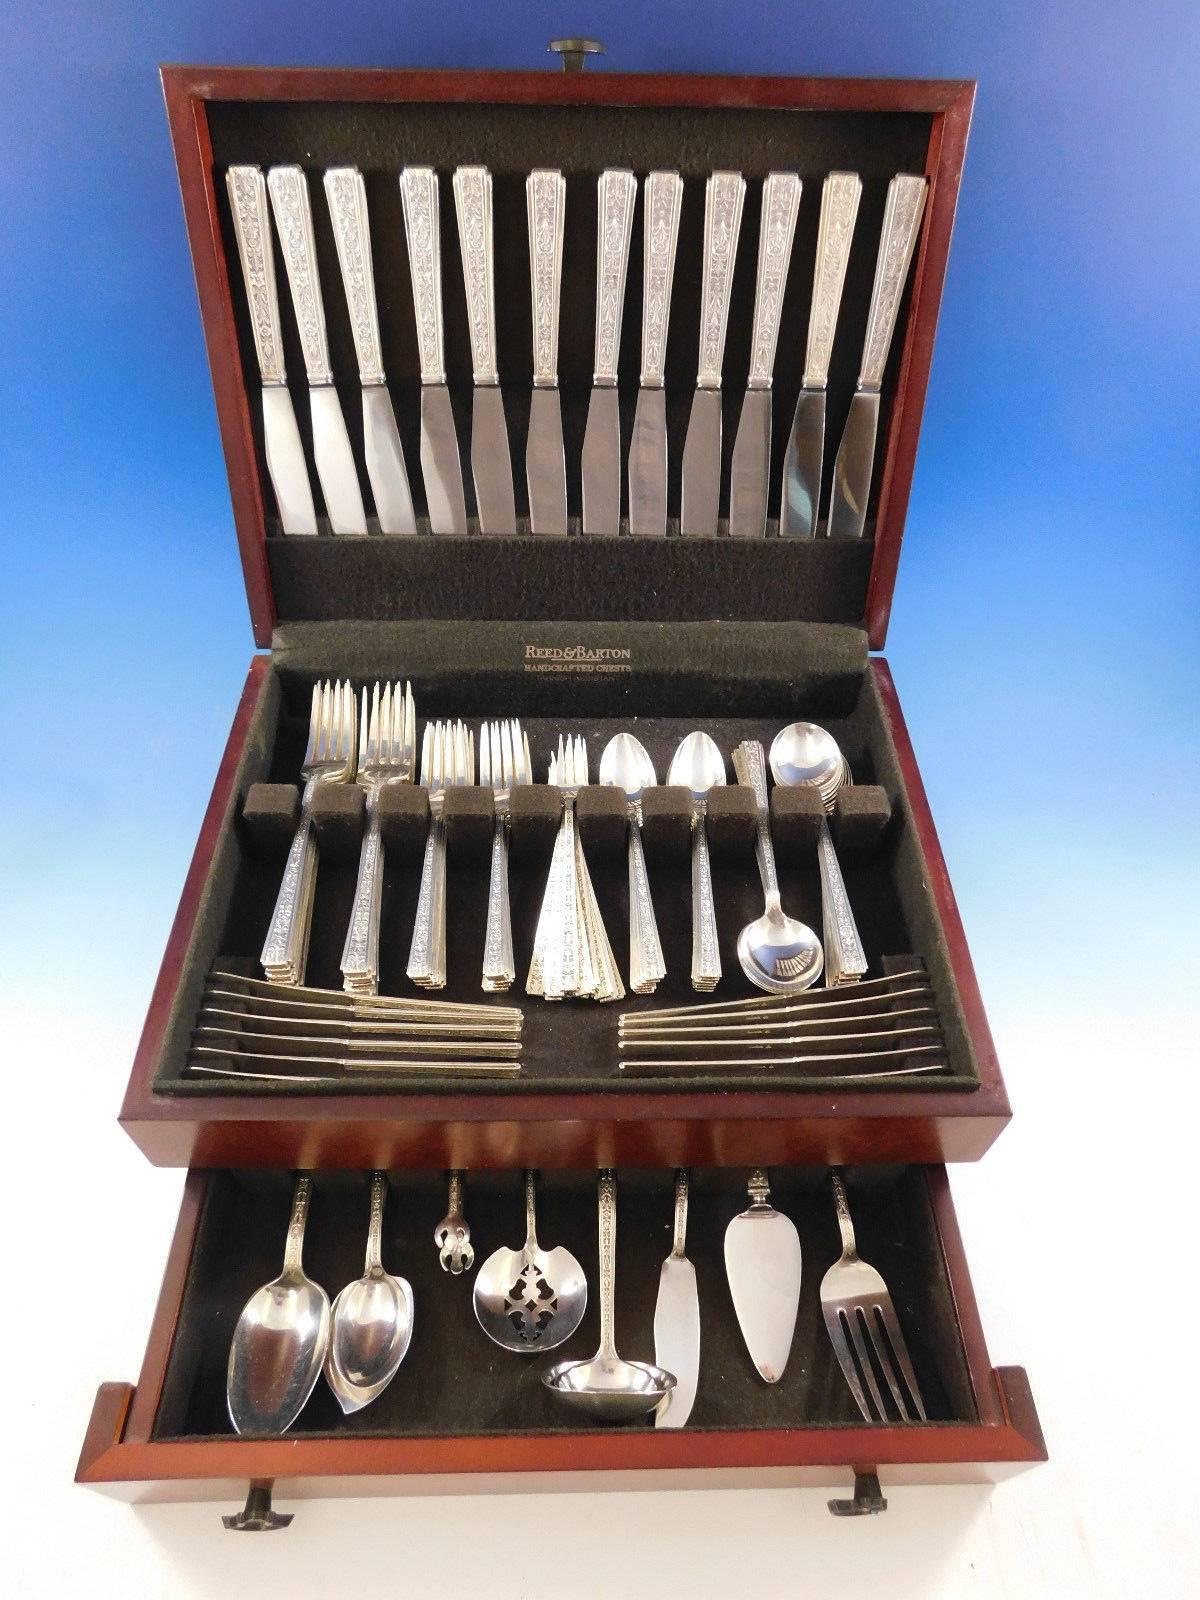 Dinner size chased classic by Lunt sterling silver flatware set, 94 pieces. This set includes: 

12 dinner size knives, 9 1/2